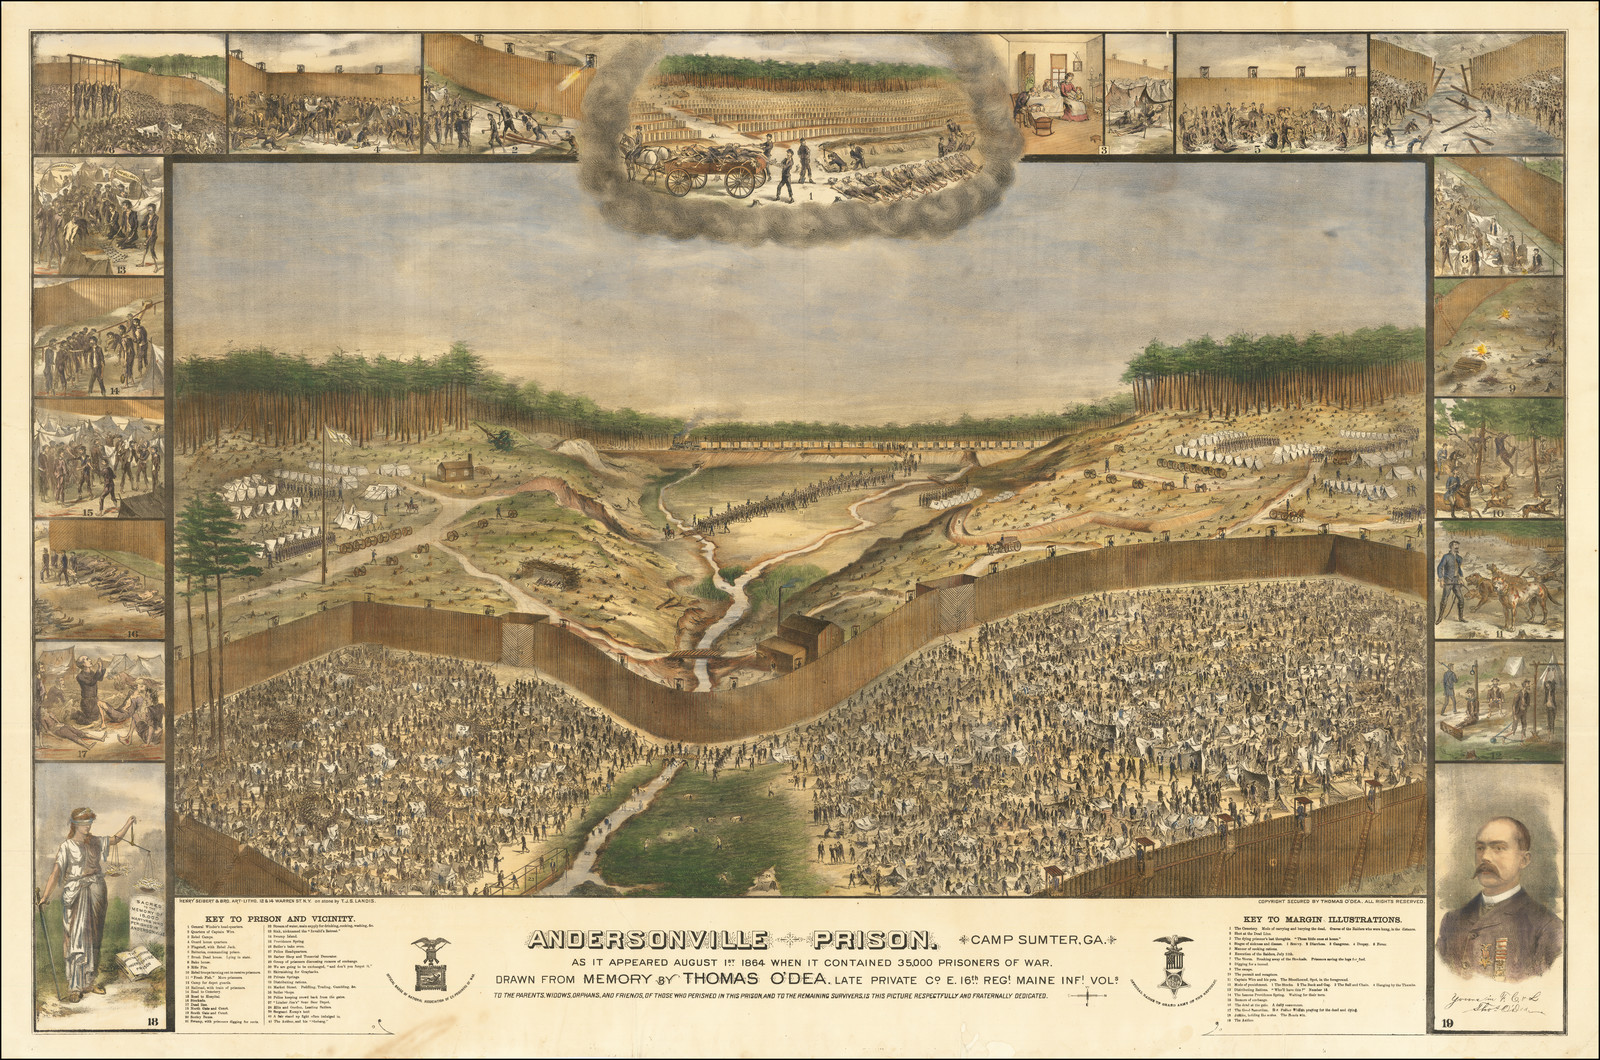 The 1885 Andersonville prison illustrated map